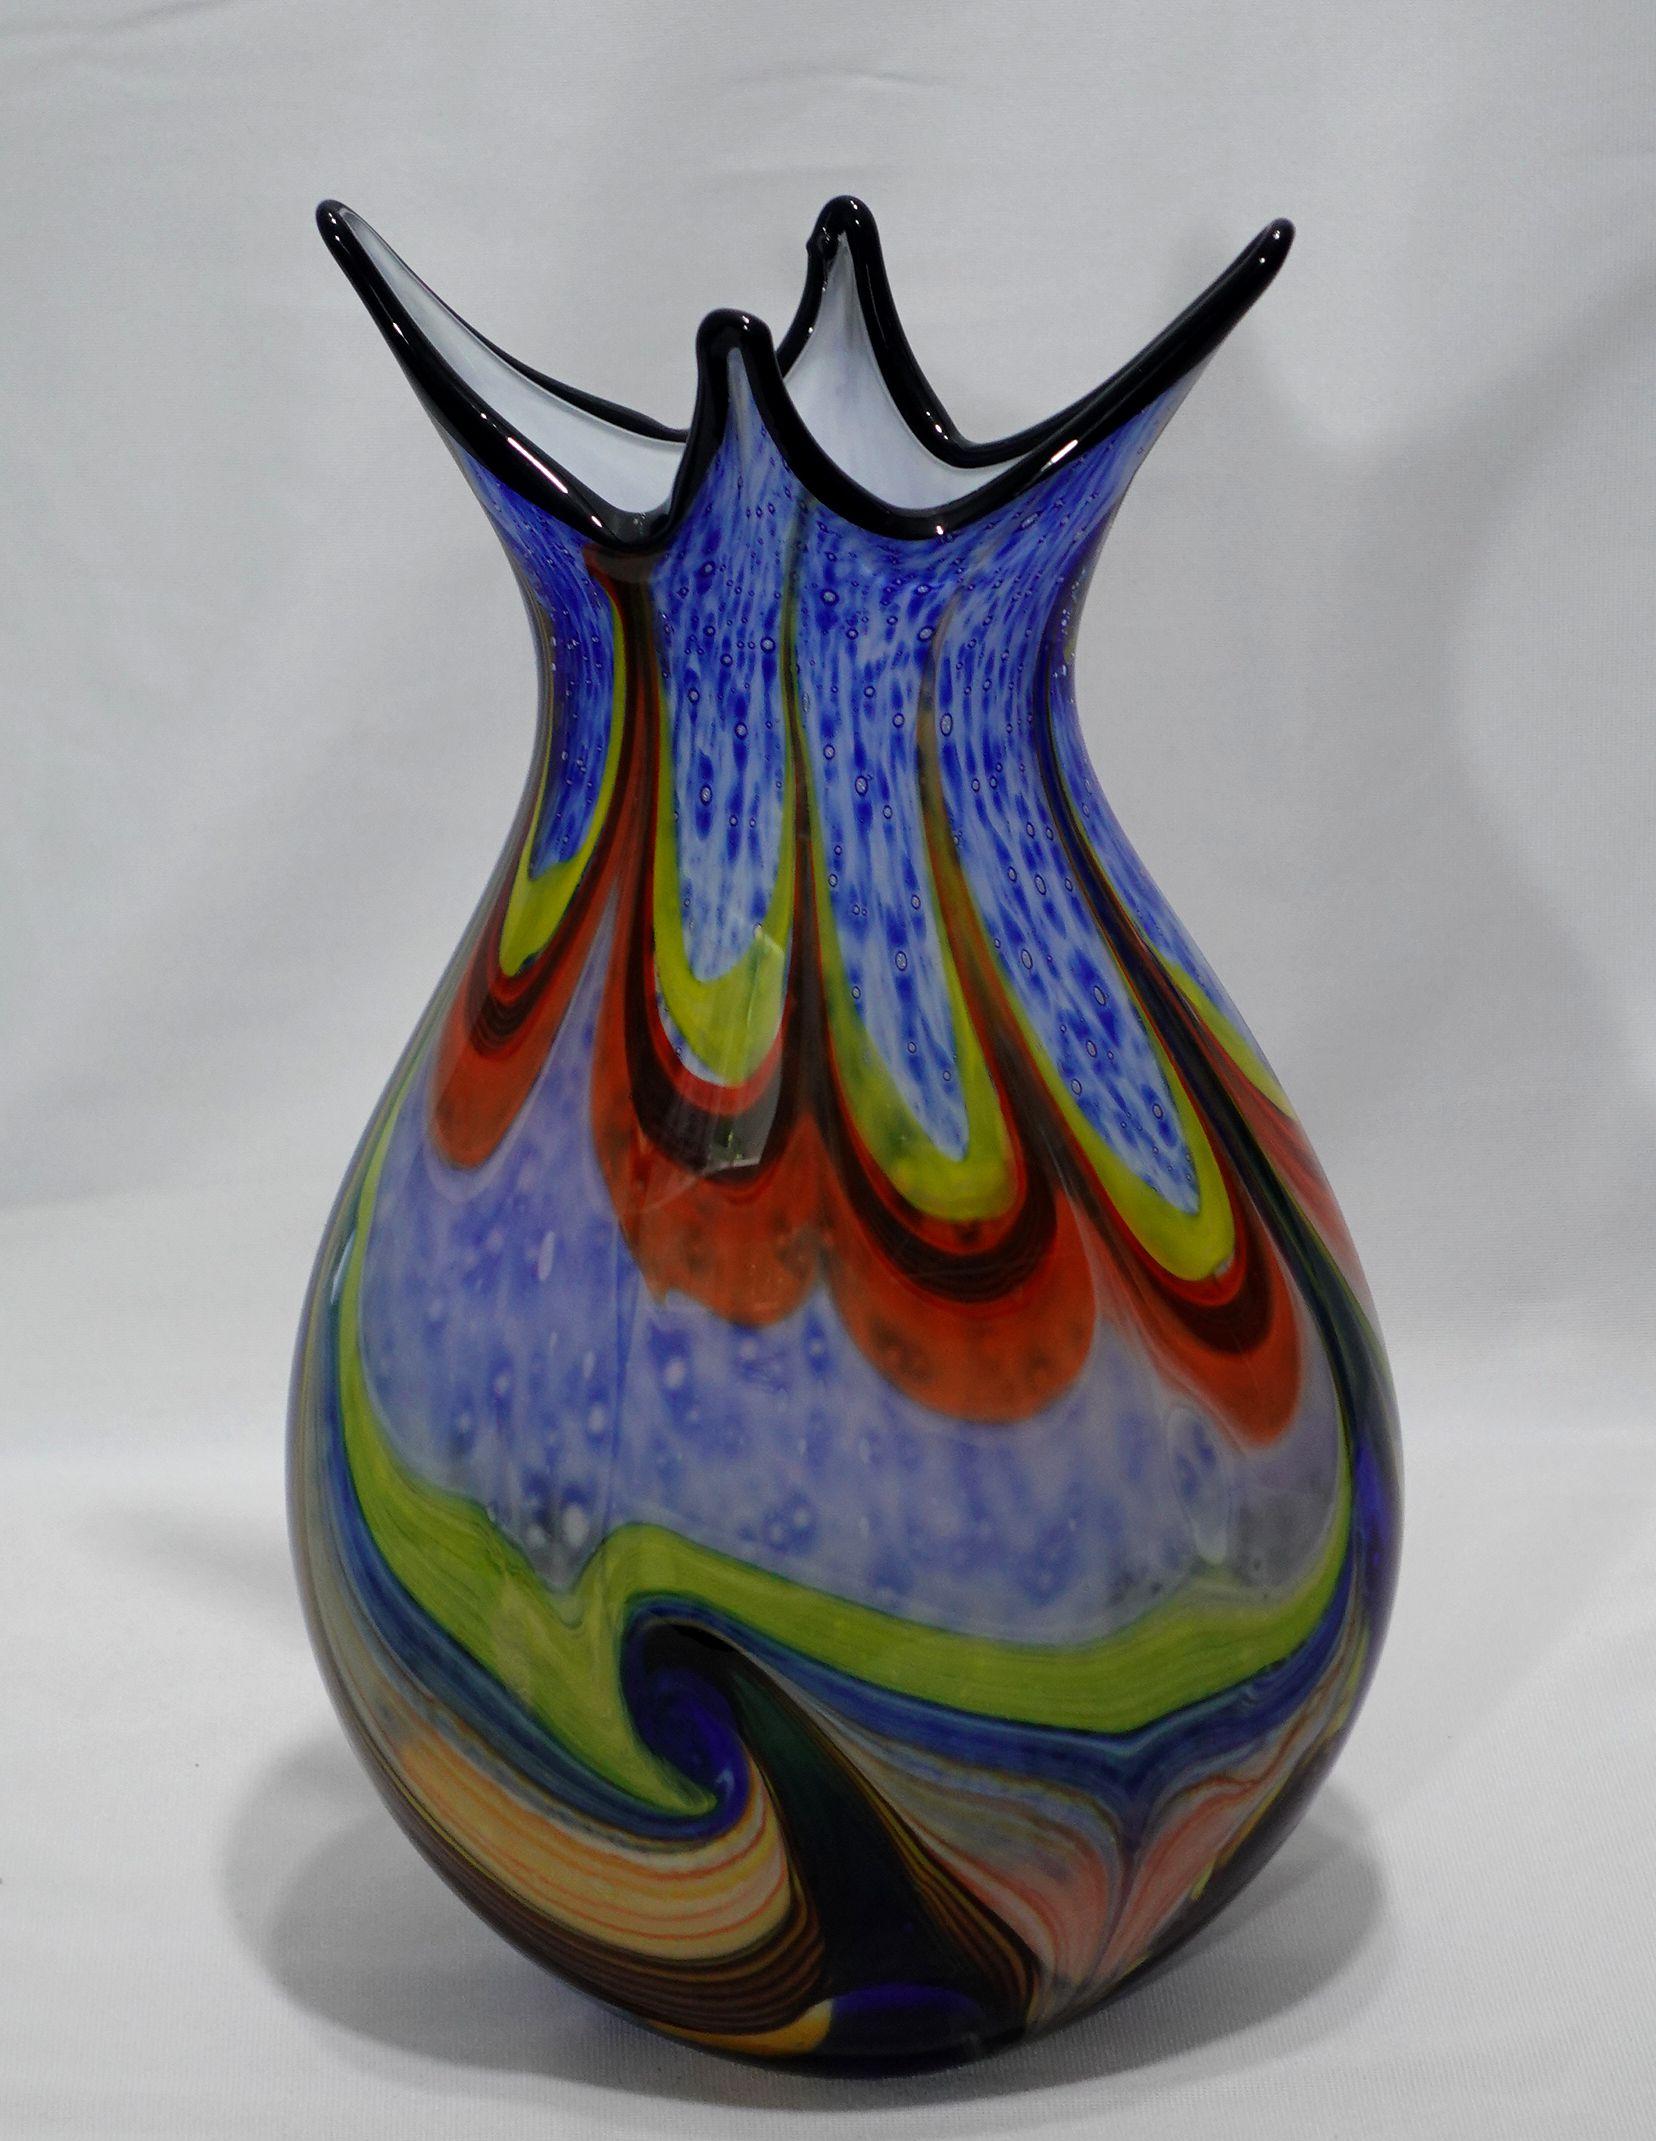 A Large and Heavy Murano Hand Blown Murrine Glass Vase, colorful artwork with a shaped top.